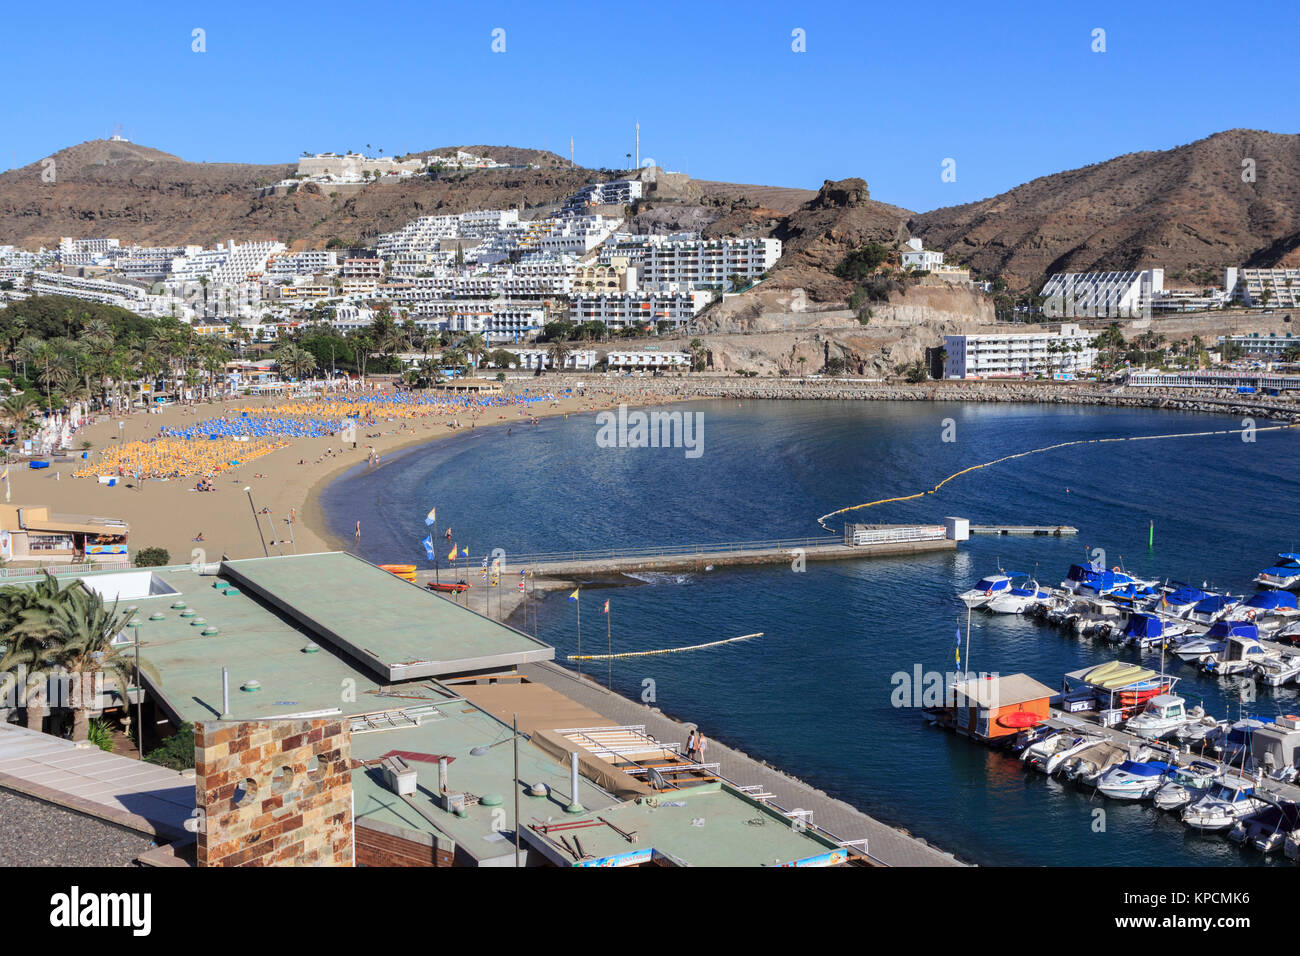 Puerto Rico Holiday resort canary island of Gran Canaria, a spanish island,  off the coast of north west africa december 2017 Stock Photo - Alamy